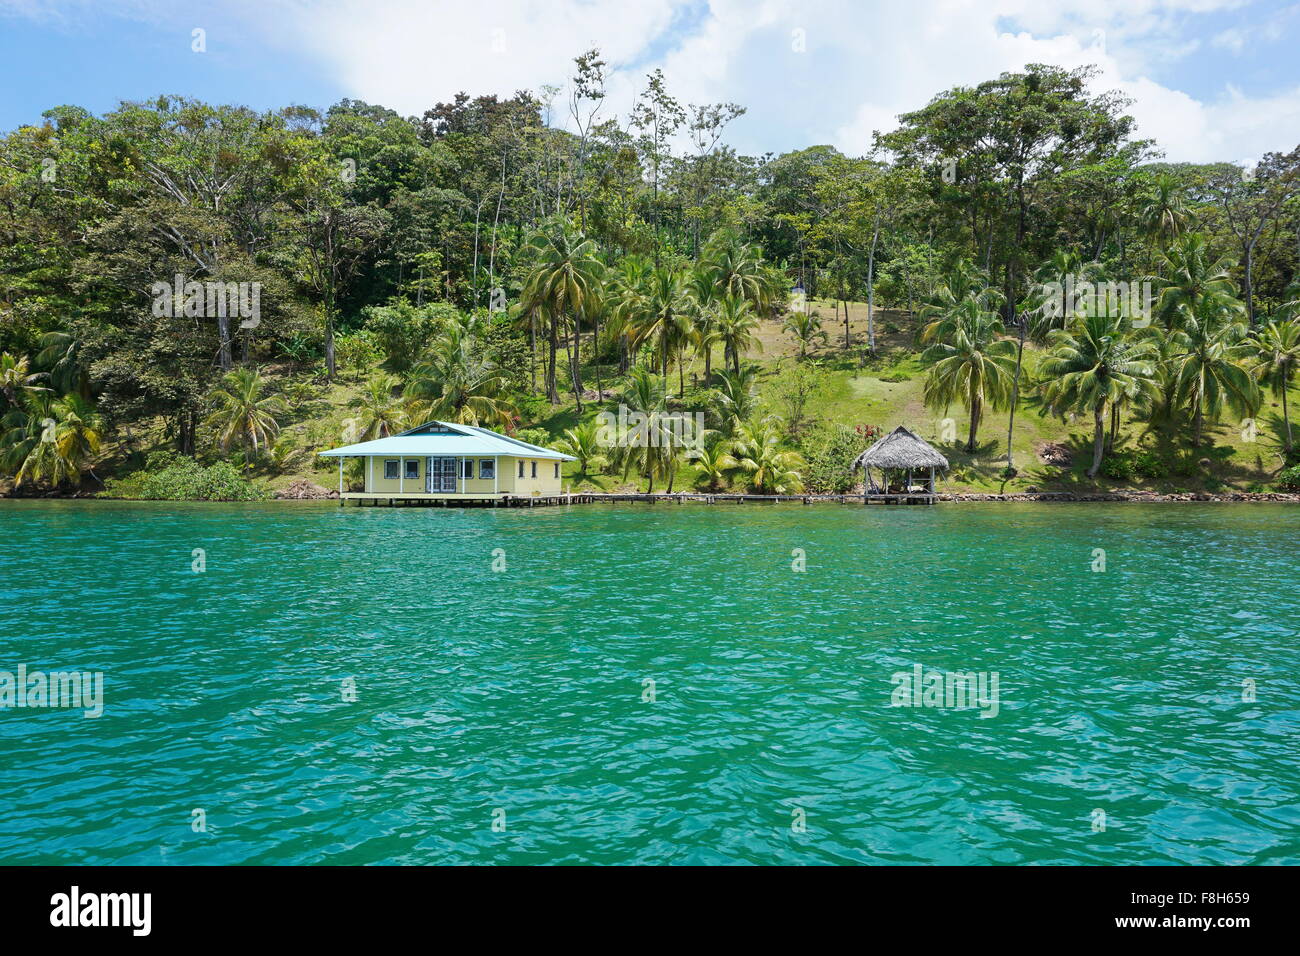 Waterfront property with tropical vegetation and house with hut over the water, viewed from the sea, Caribbean, Panama Stock Photo